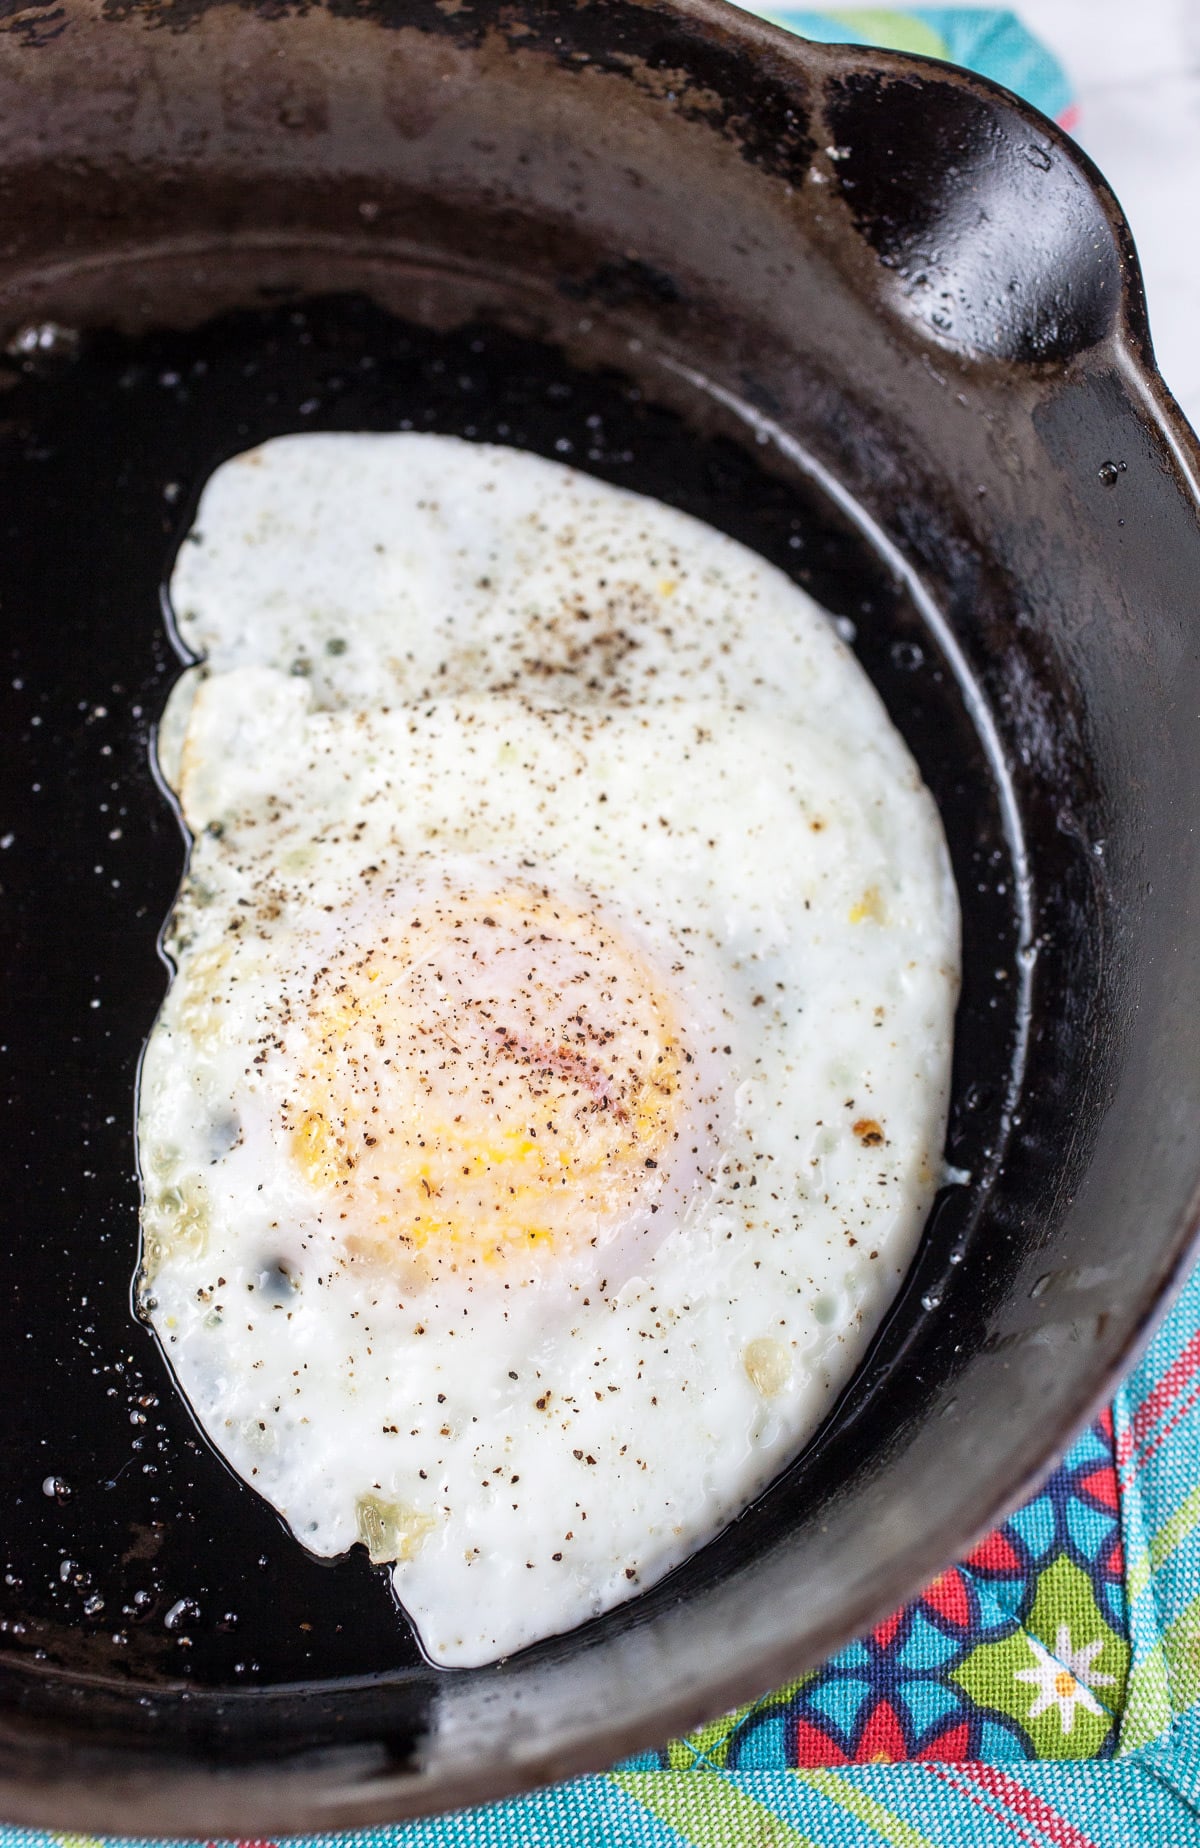 Over easy egg in small cast iron skillet.